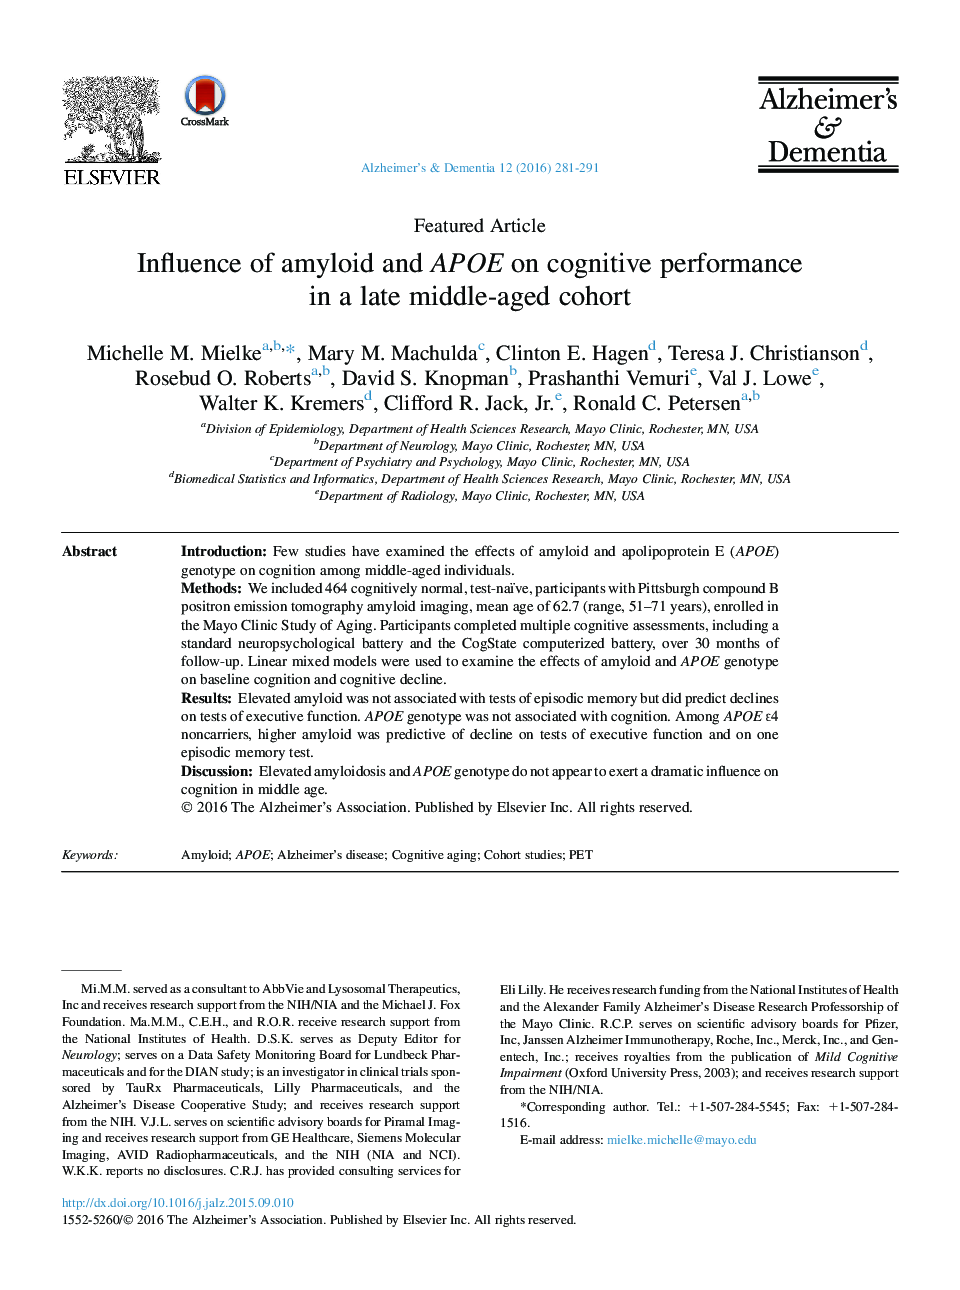 Featured ArticleInfluence of amyloid and APOE on cognitive performance in a late middle-aged cohort